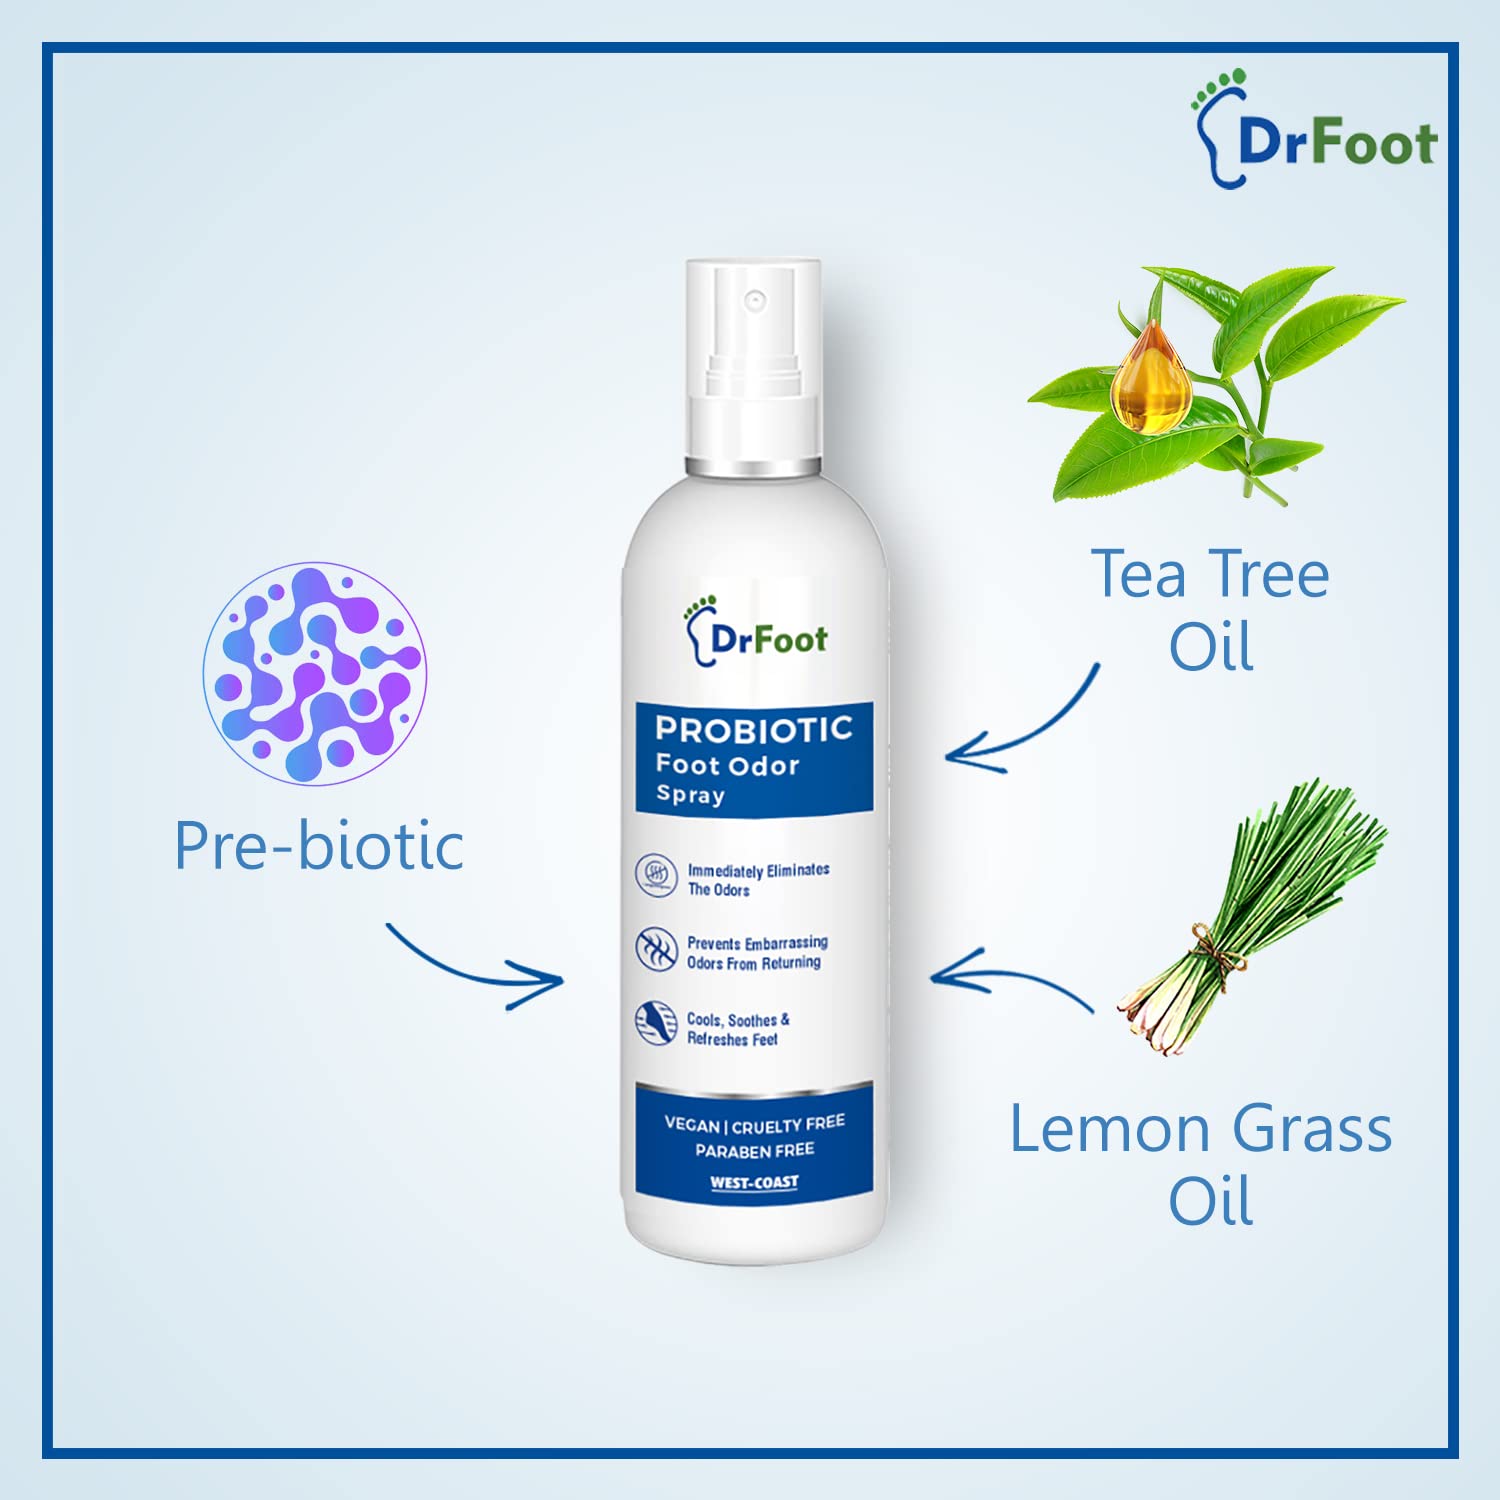 Dr Foot Probiotic Foot Odor Spray Helps to remove Feet & Shoes Worst Odors, Cools, Soothes & Refreshes Feet with the goodness of Lemon Grass Oil, Tea Tree Oil - 100ml (Pack of 10)